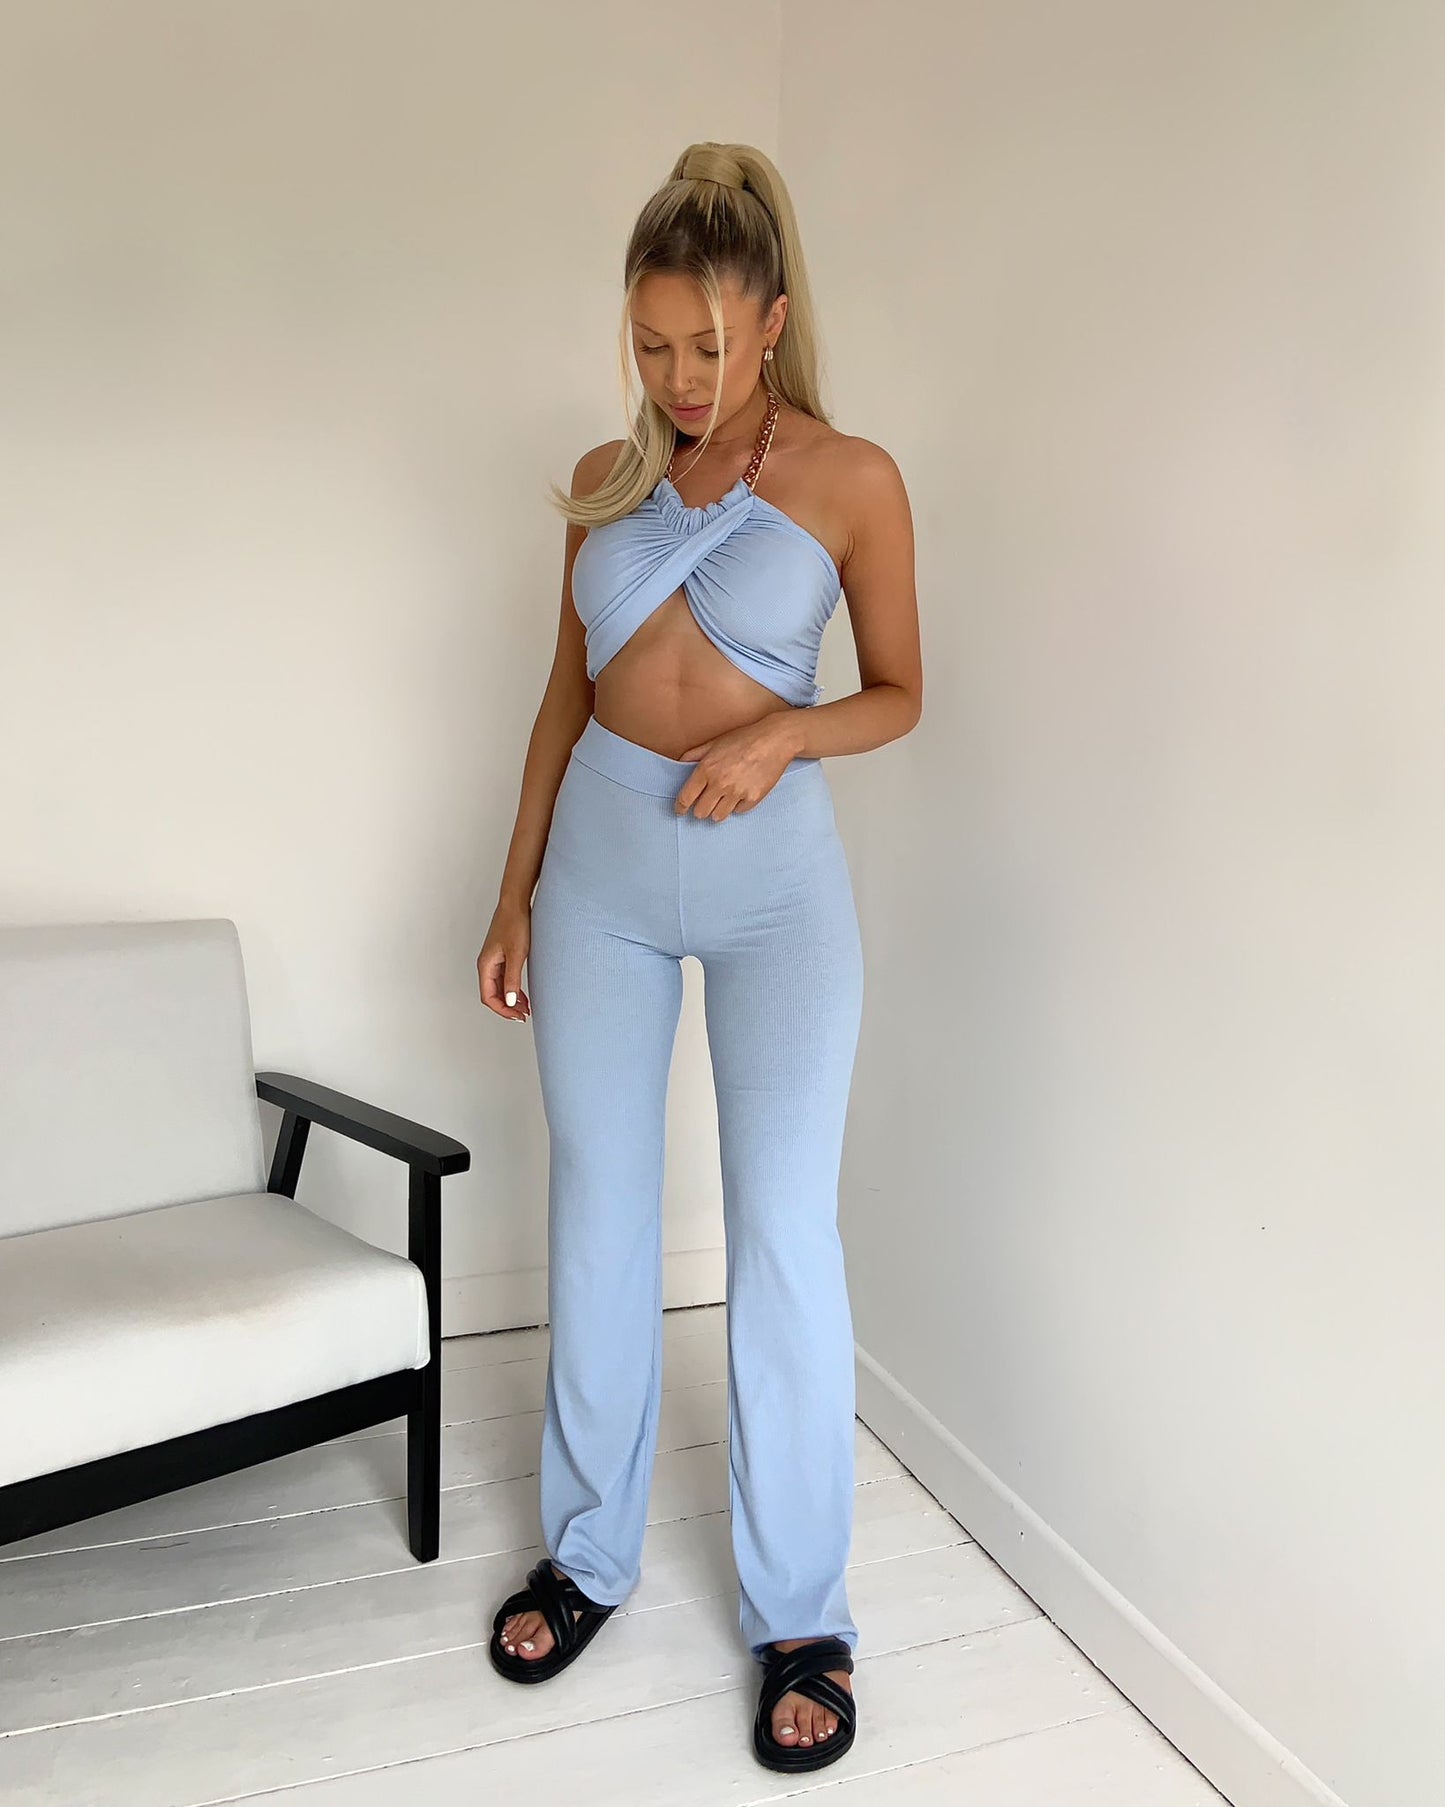 Ipsy Chain link halter neck top and bottom set